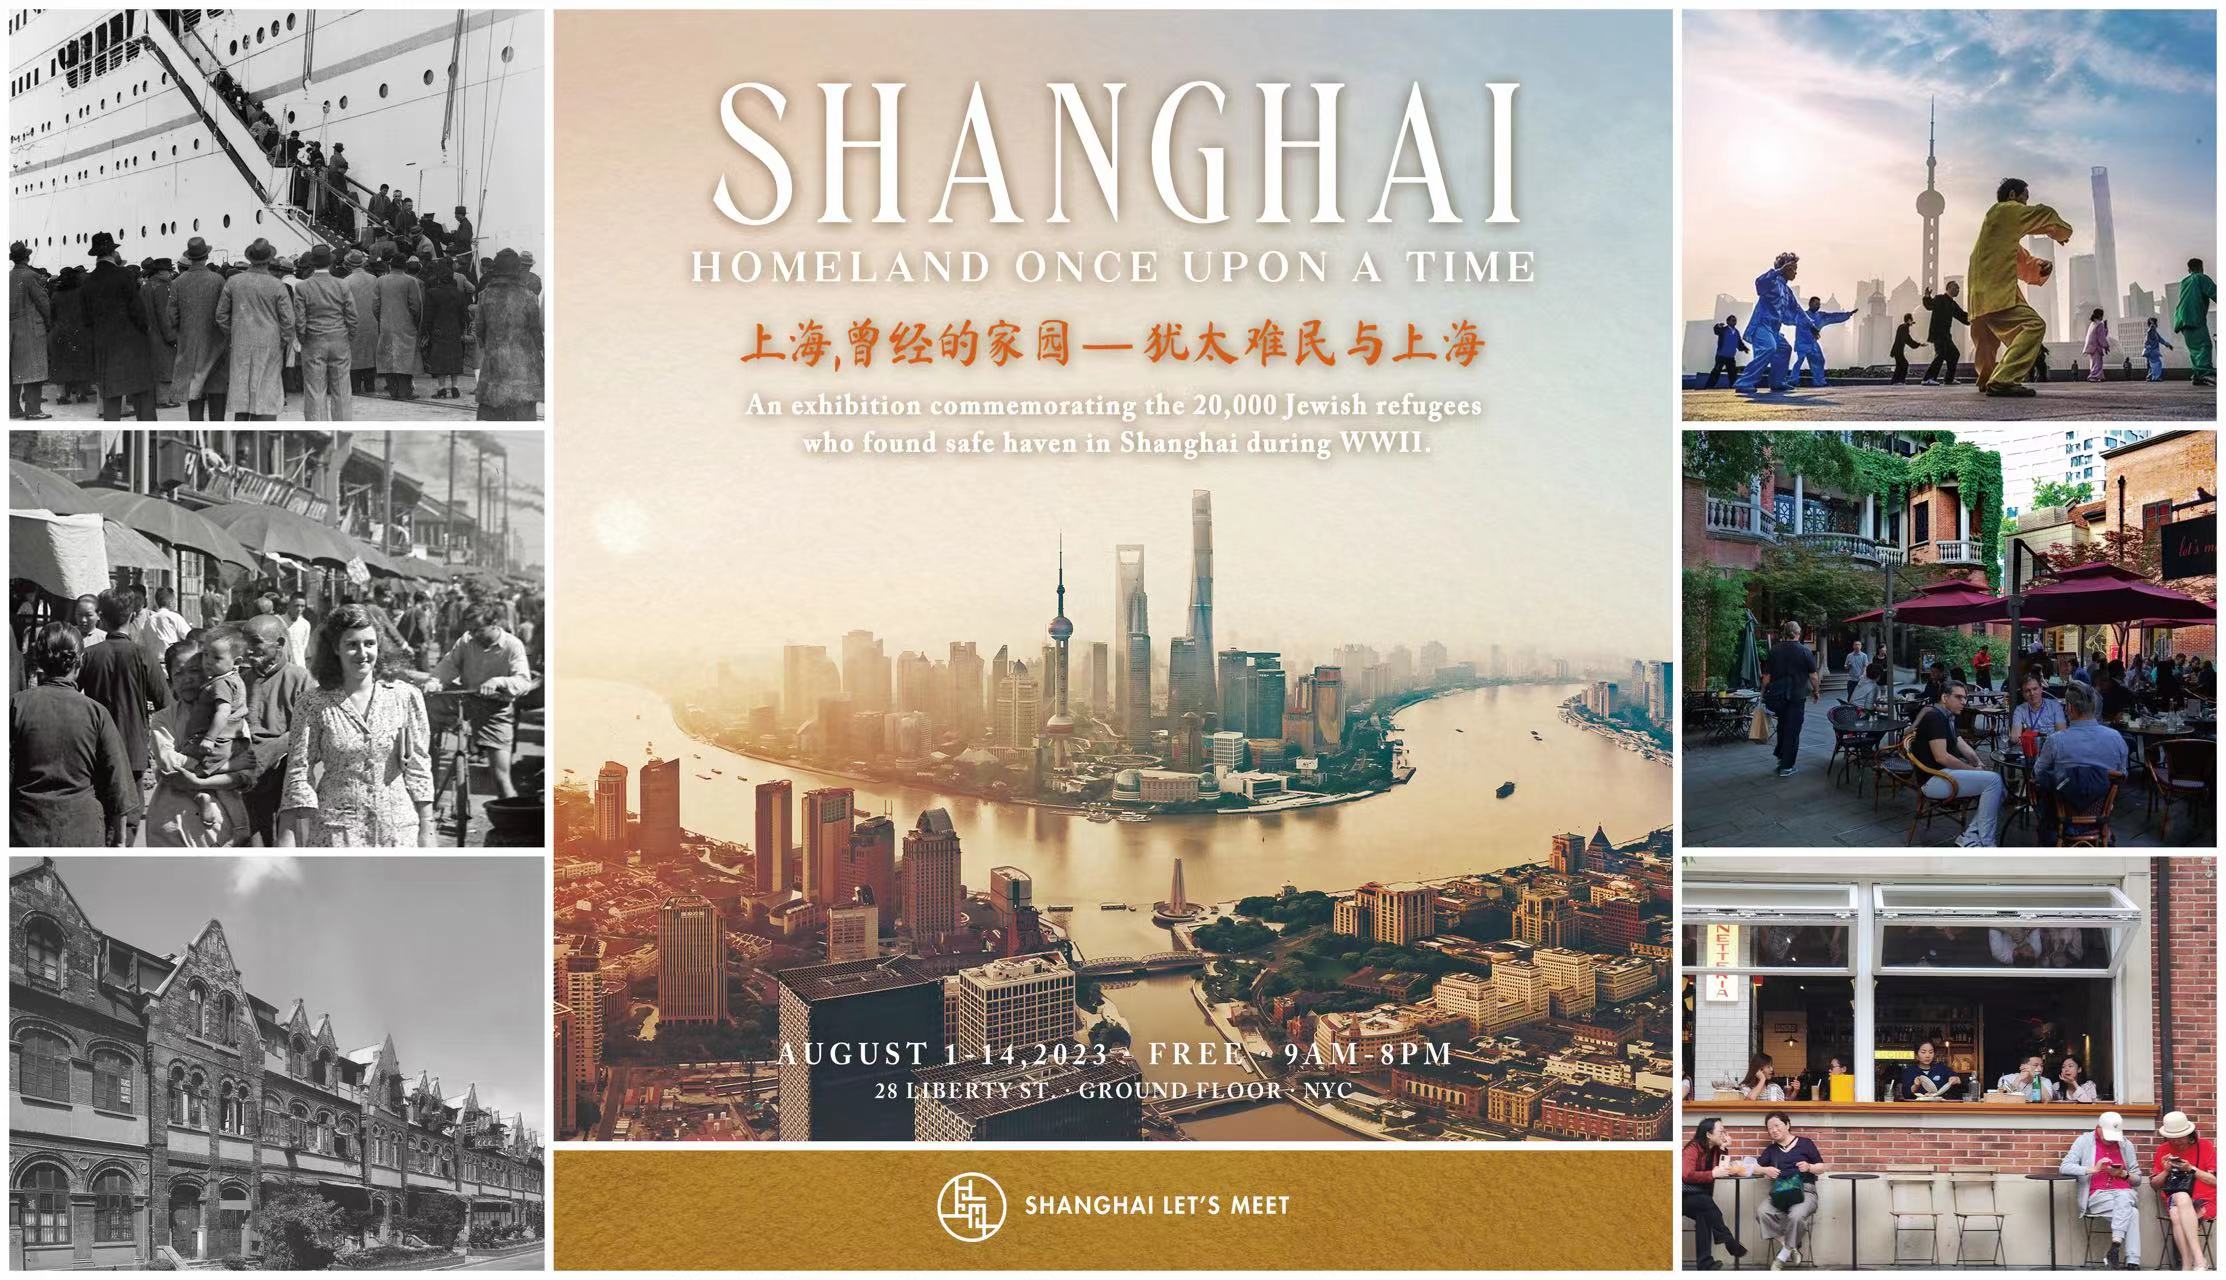 Poster of the exhibition “Shanghai, Homeland Once Upon a Time – Jewish Refugees and Shanghai” in NYC.